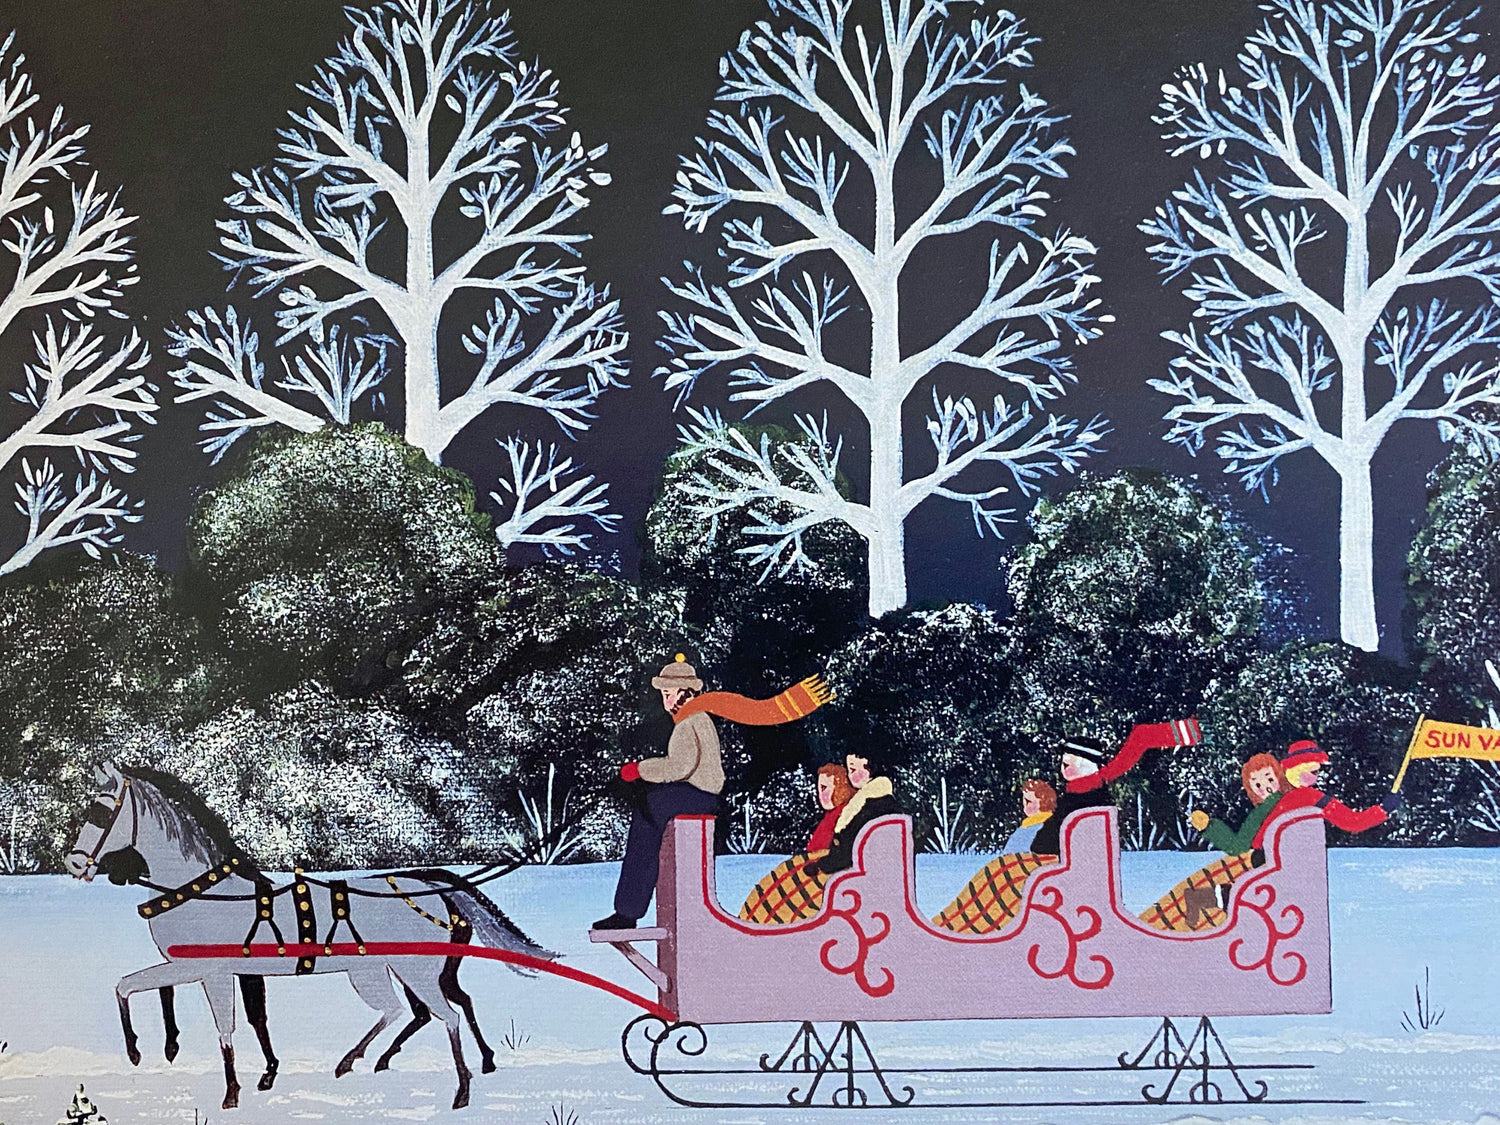 Trail Creek Sleigh Ride - Limited Edition Lithograph on Paper by Jane Wooster Scott